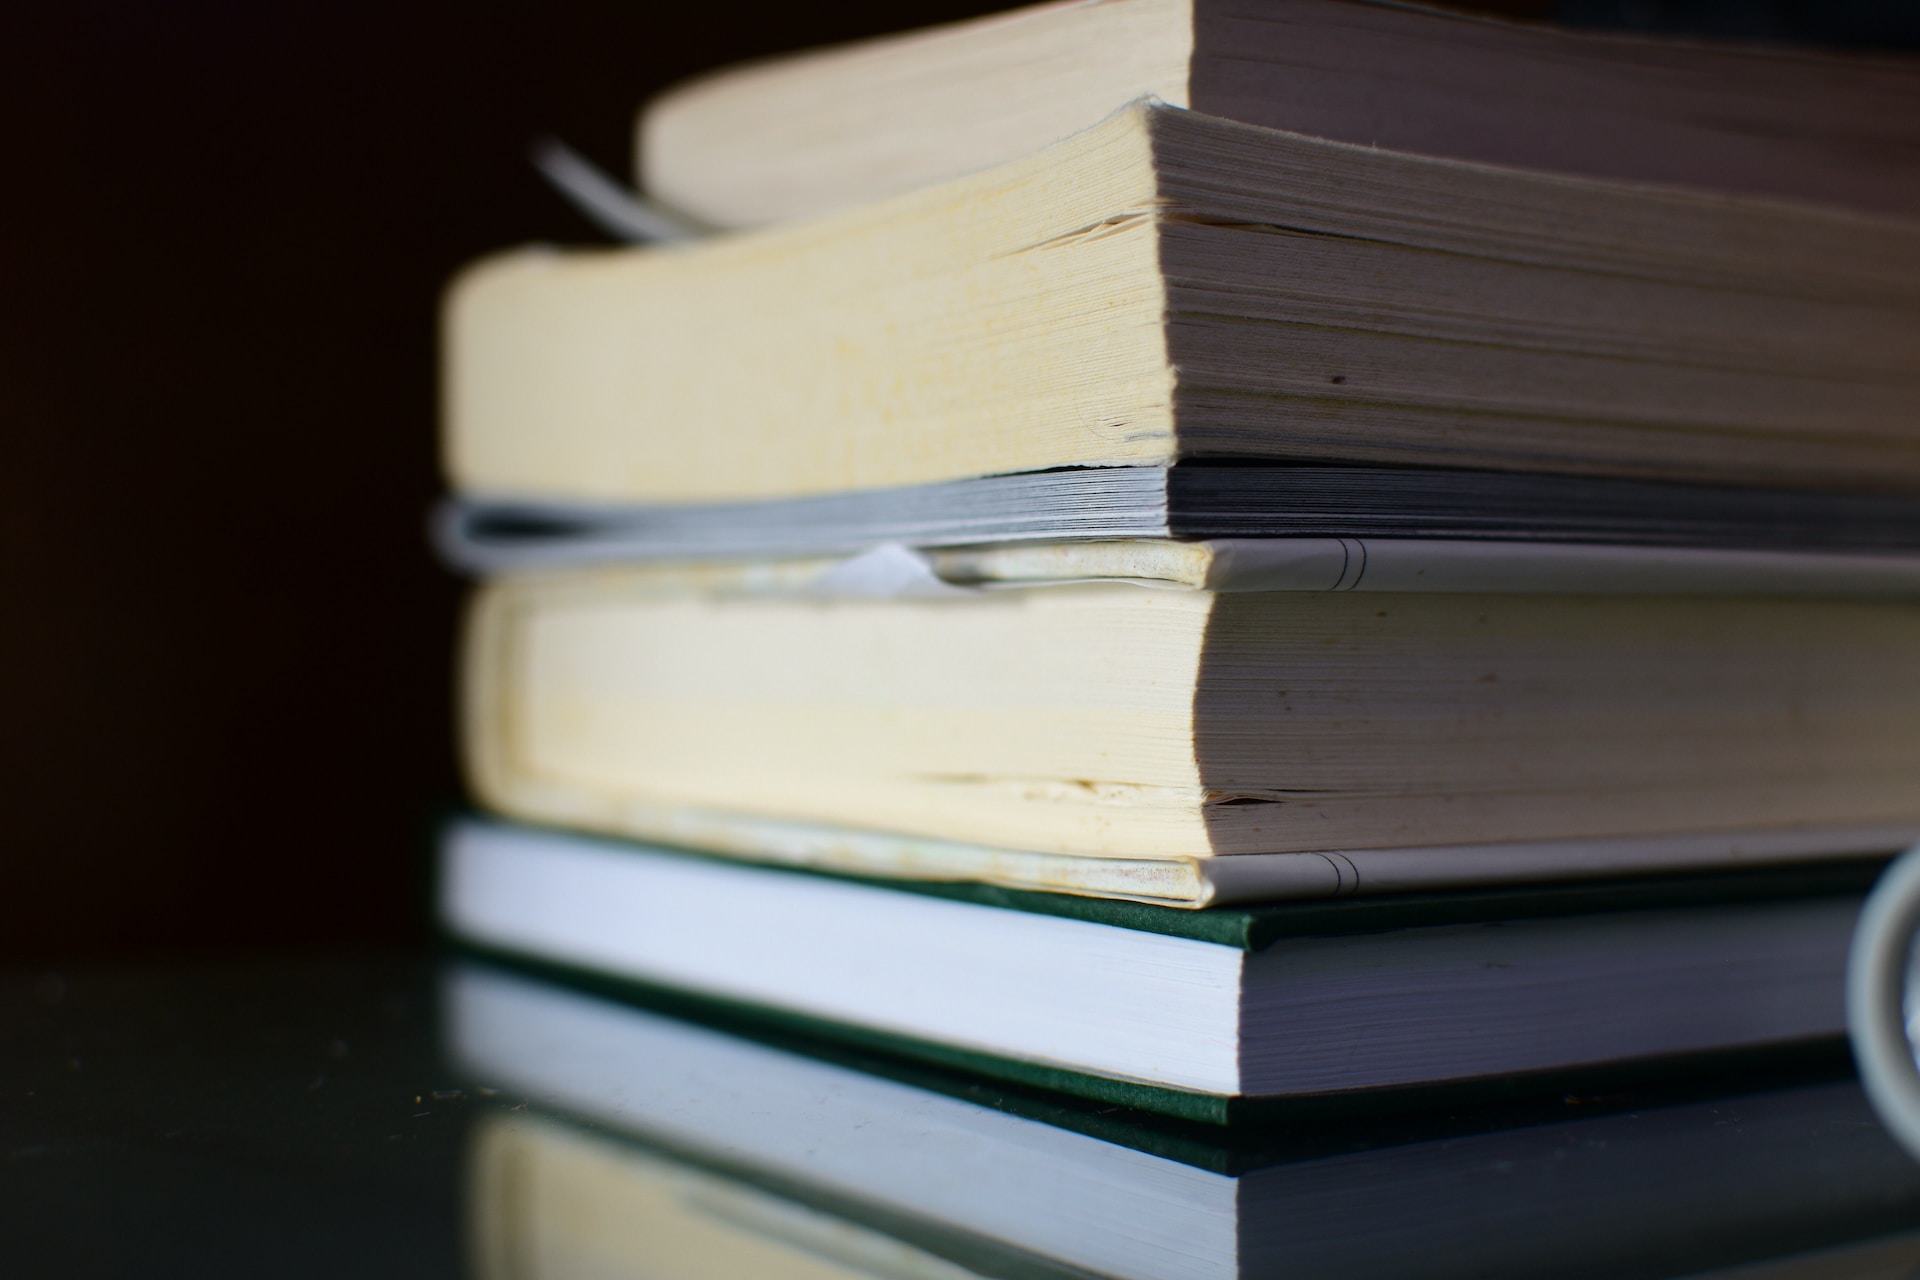 A stack of books on a table, fostering growth.